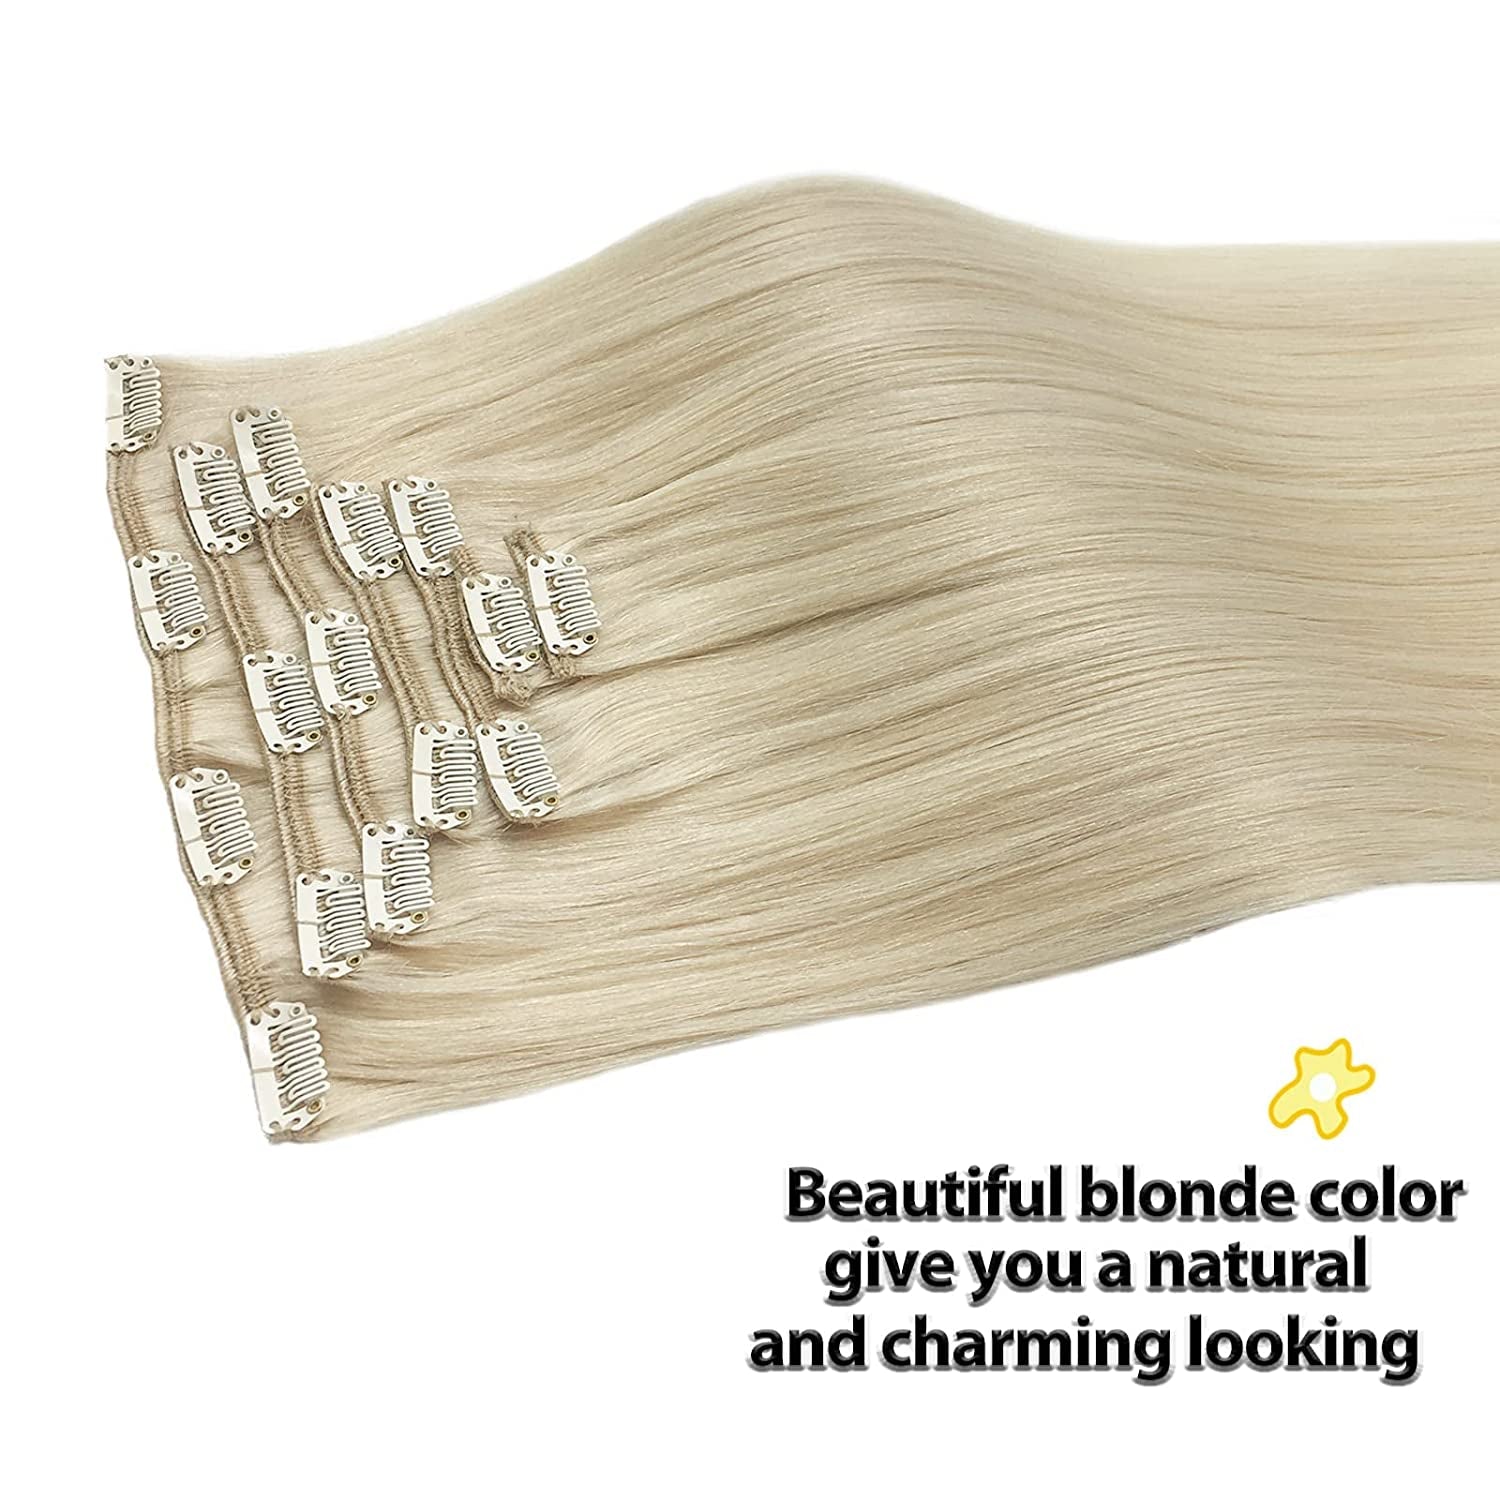 GOO GOO Clip-In Hair Extensions for Women, Soft & Natural, Handmade Real Human Hair Extensions, Platinum Blonde, Long, Straight #60A, 7Pcs 120G 20 Inches